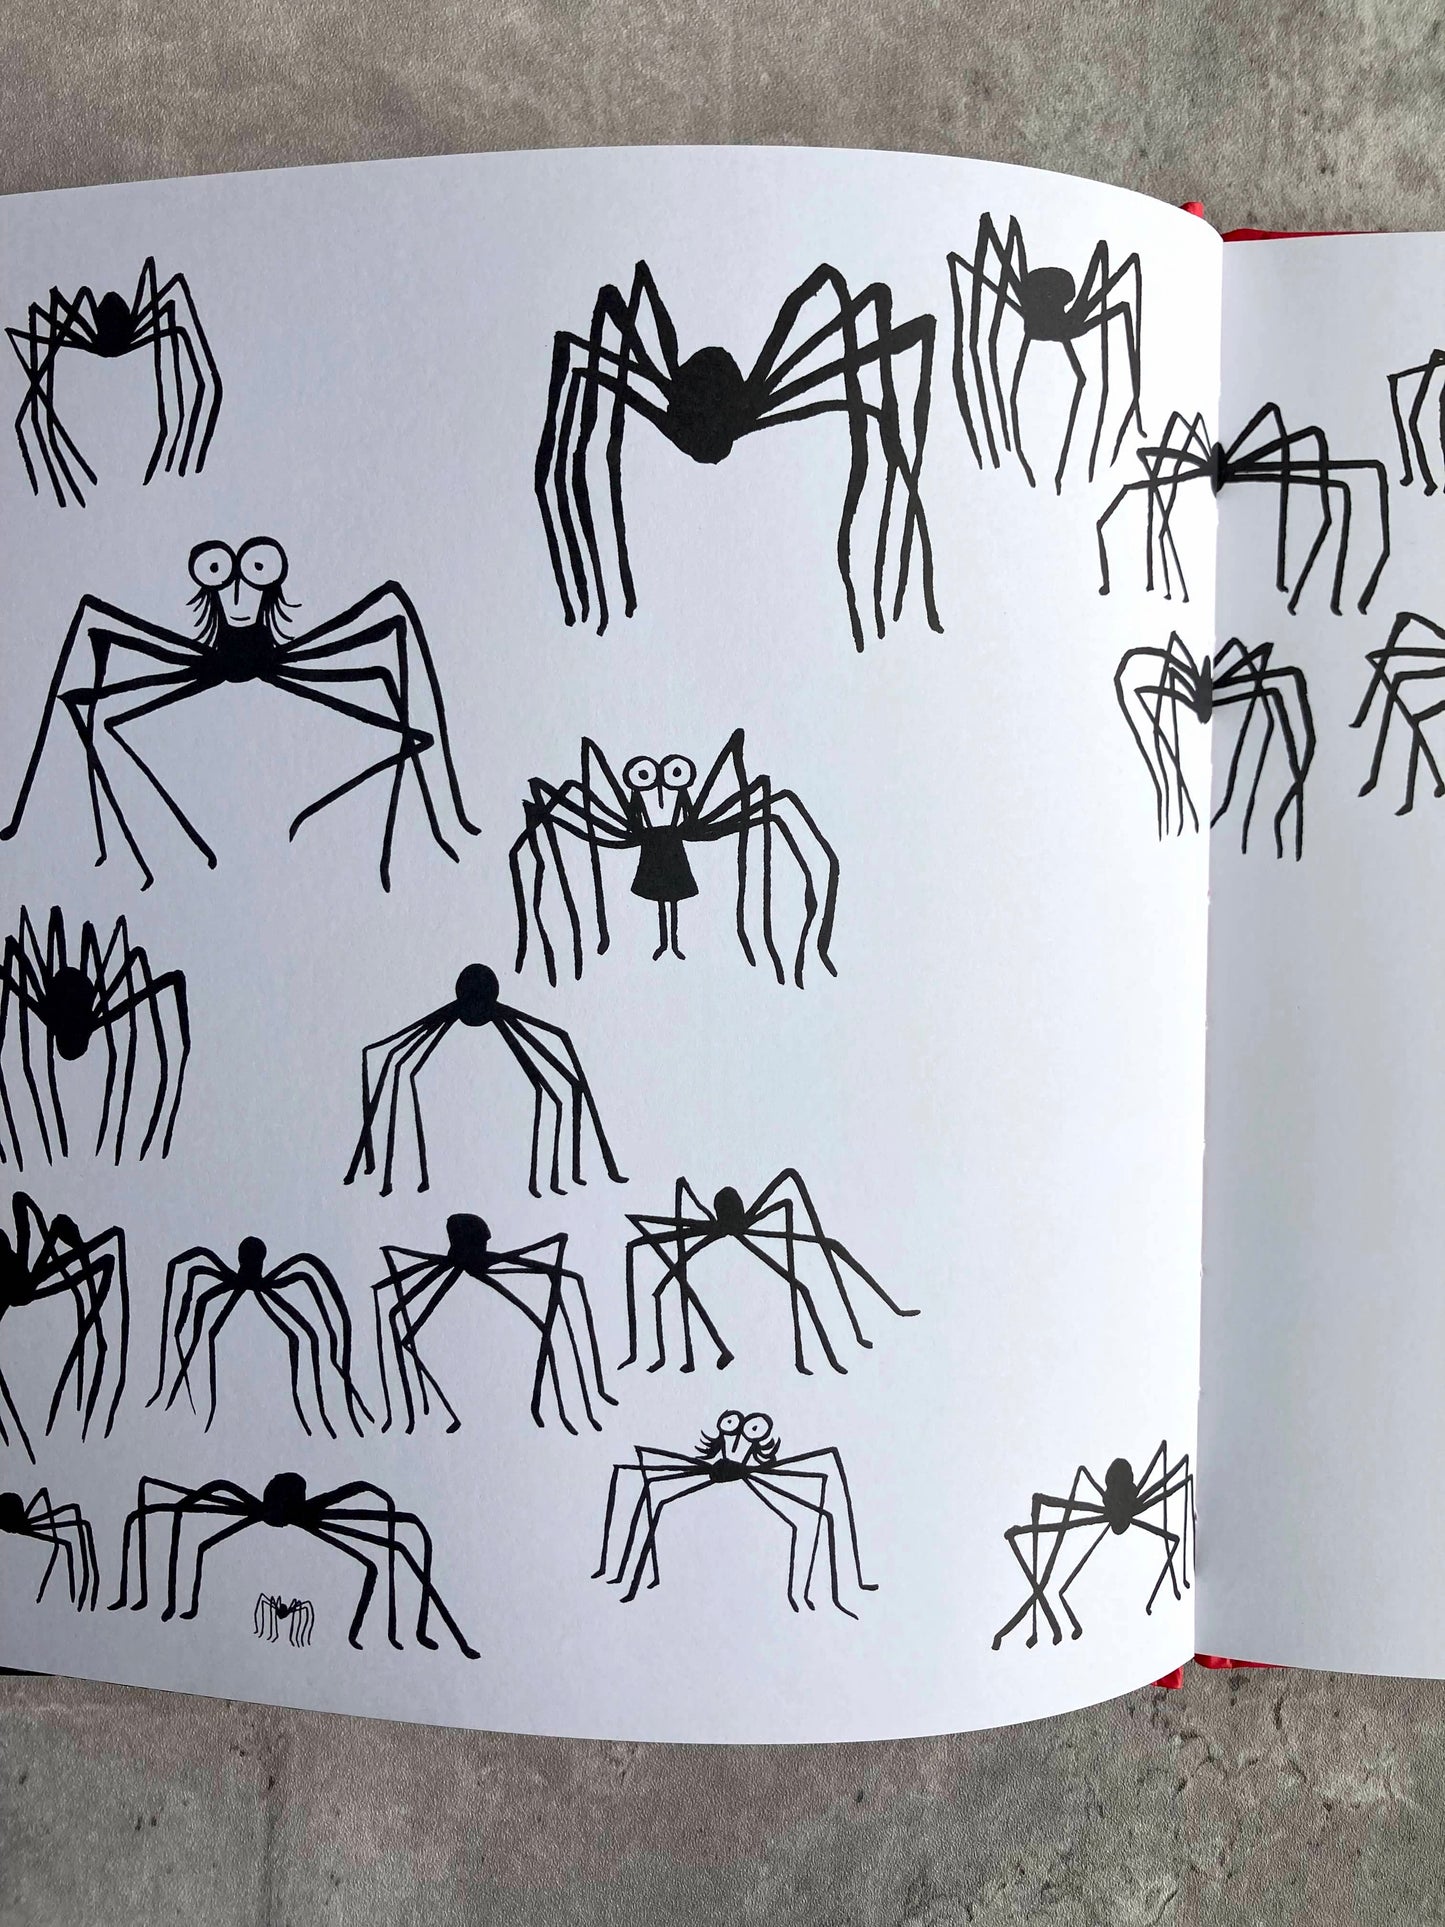 Louise Bourgeois Made Giant Spiders and Wasn't Sorry Book – pucciManuli